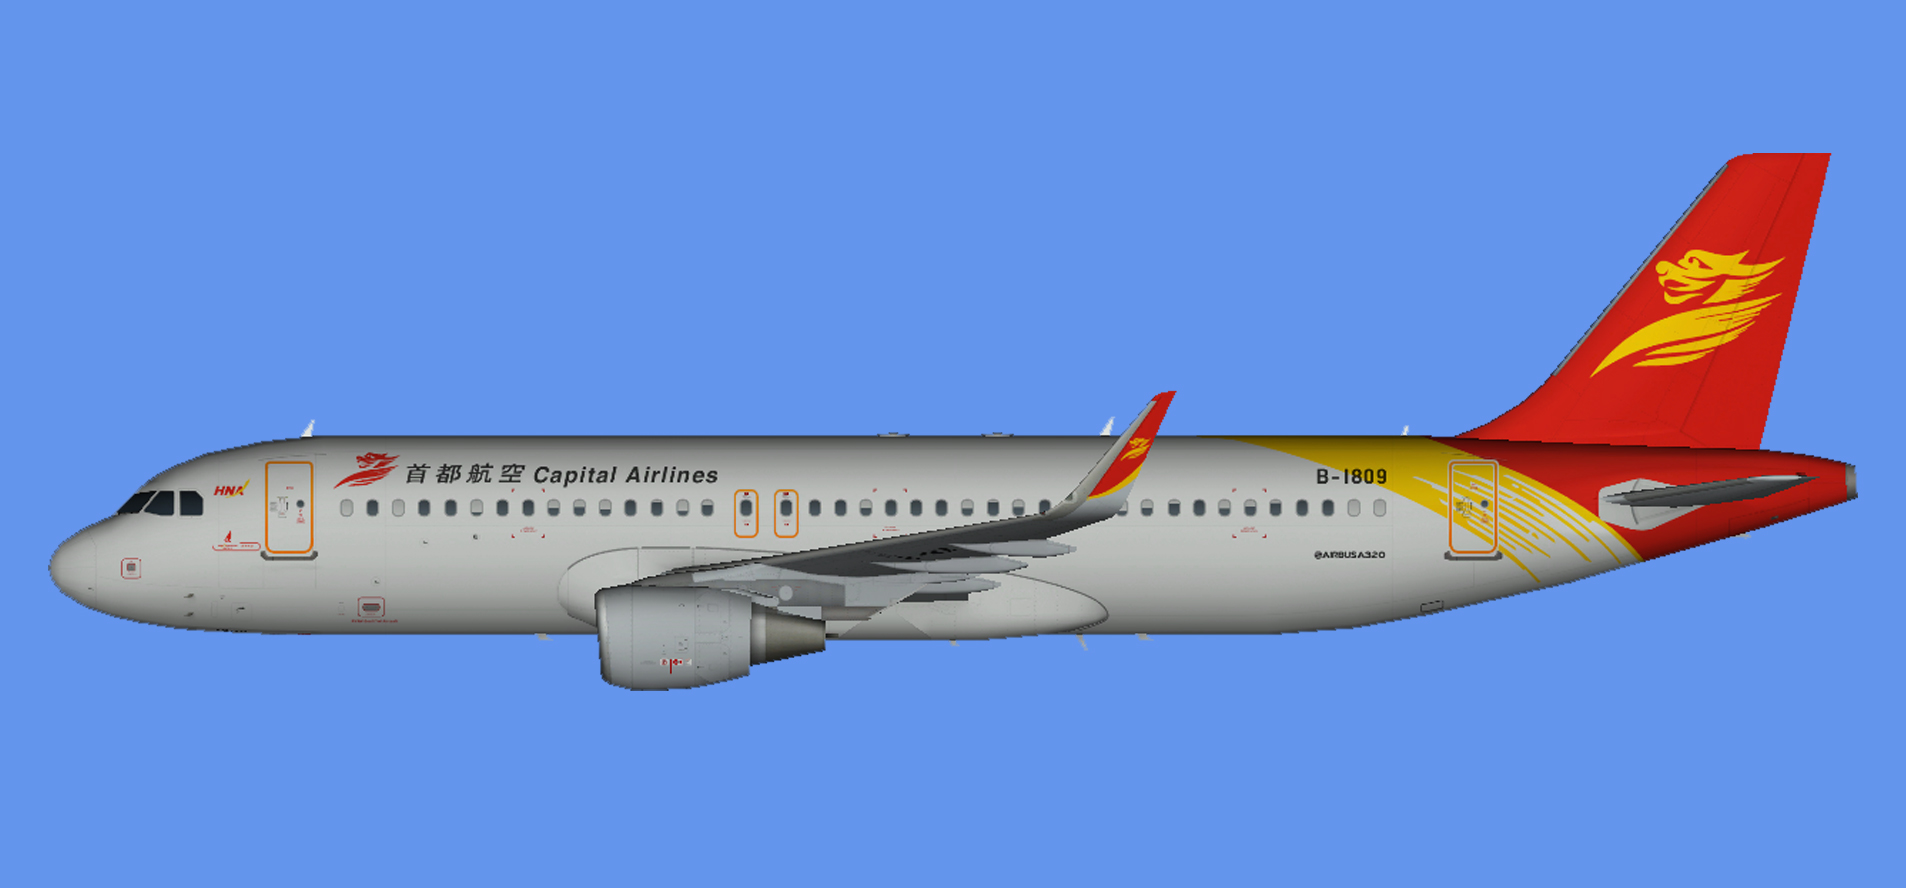 Capital Airlines Airbus A320 SL CFM